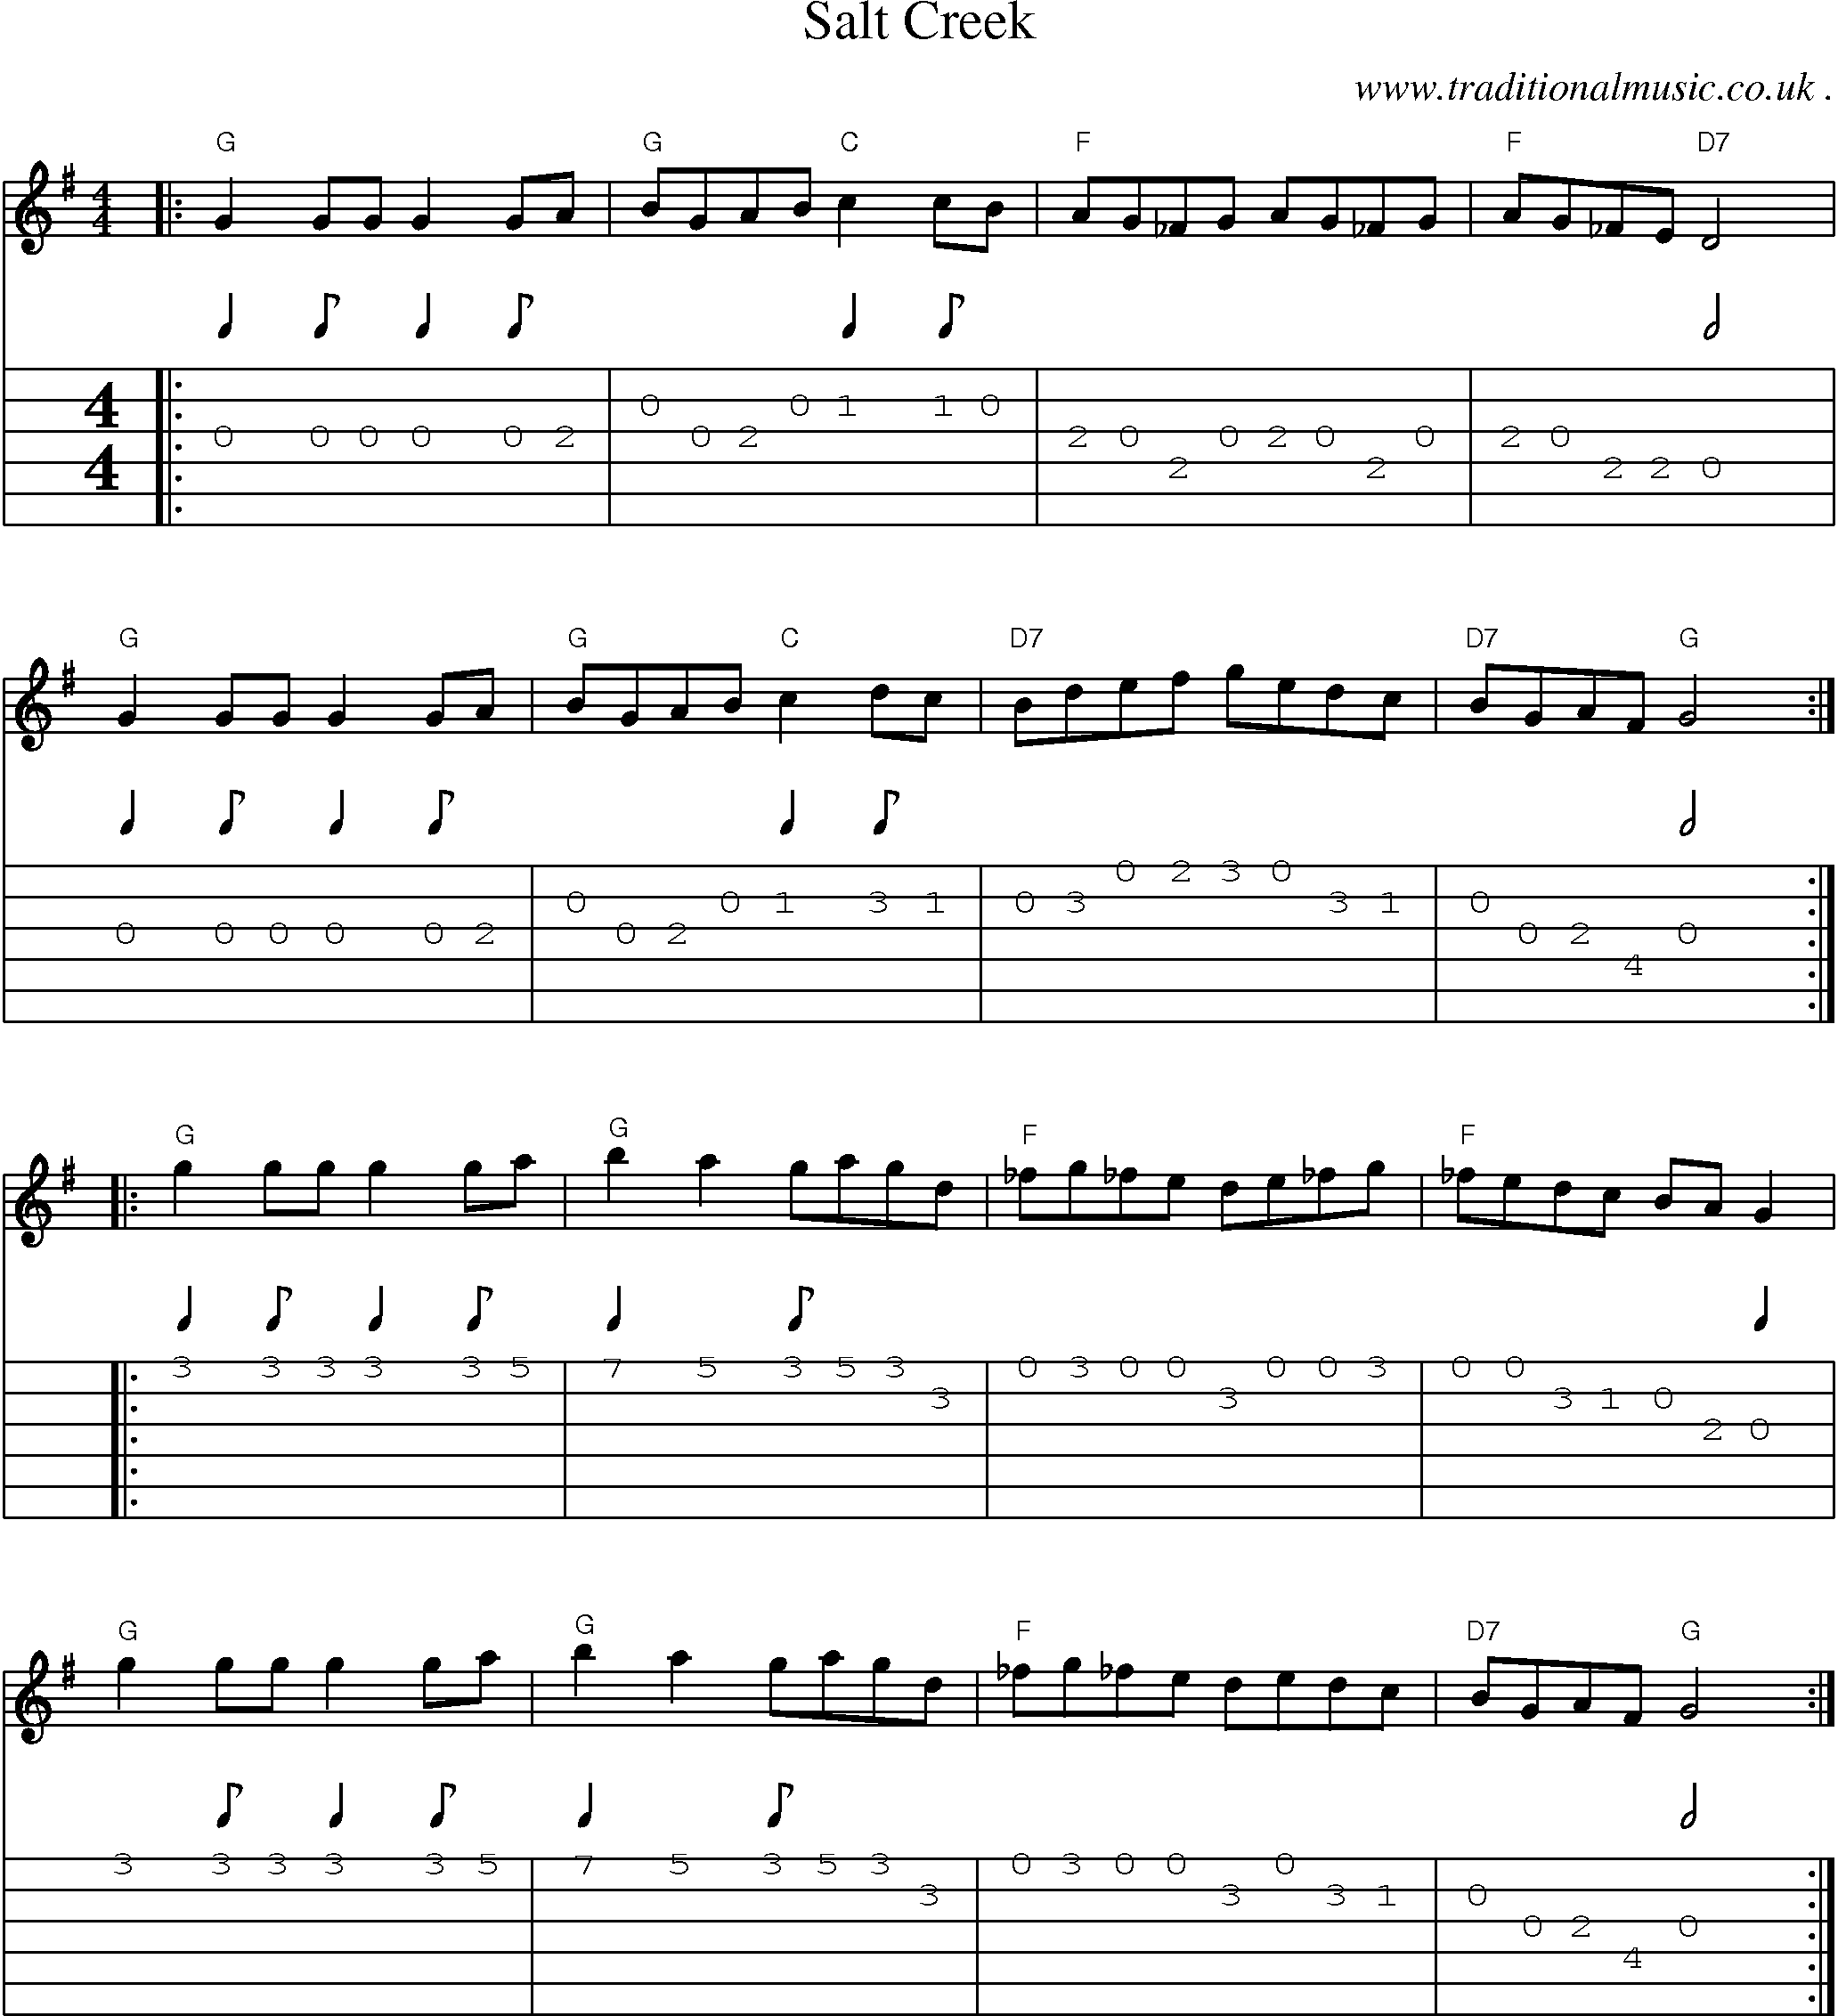 Music Score and Guitar Tabs for Salt Creek